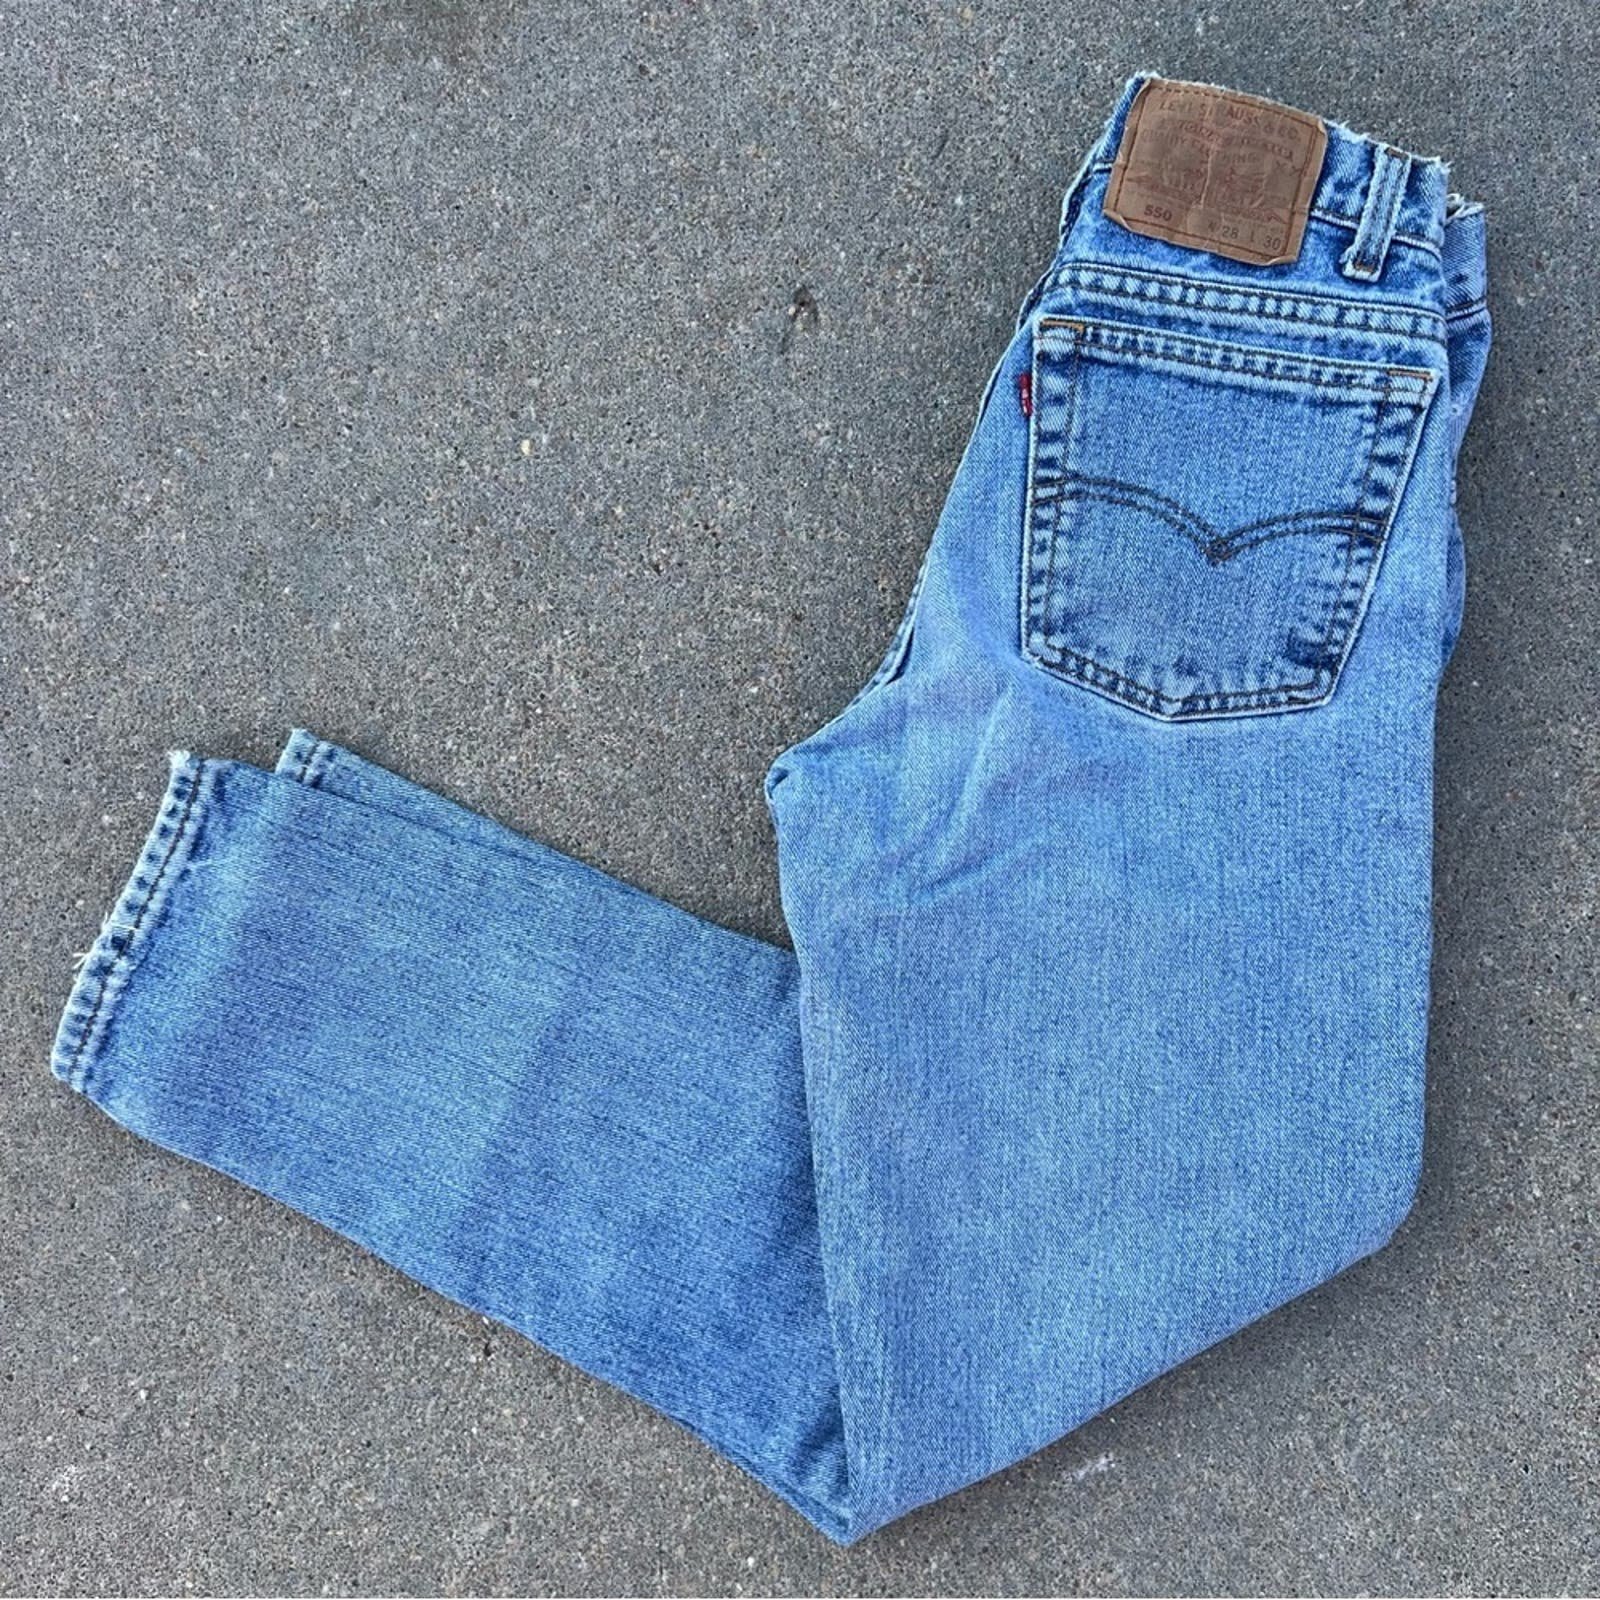 Vintage 90s Levi’s 550 jeans - worn in faded blue 28x30 Hic2Ex2wK